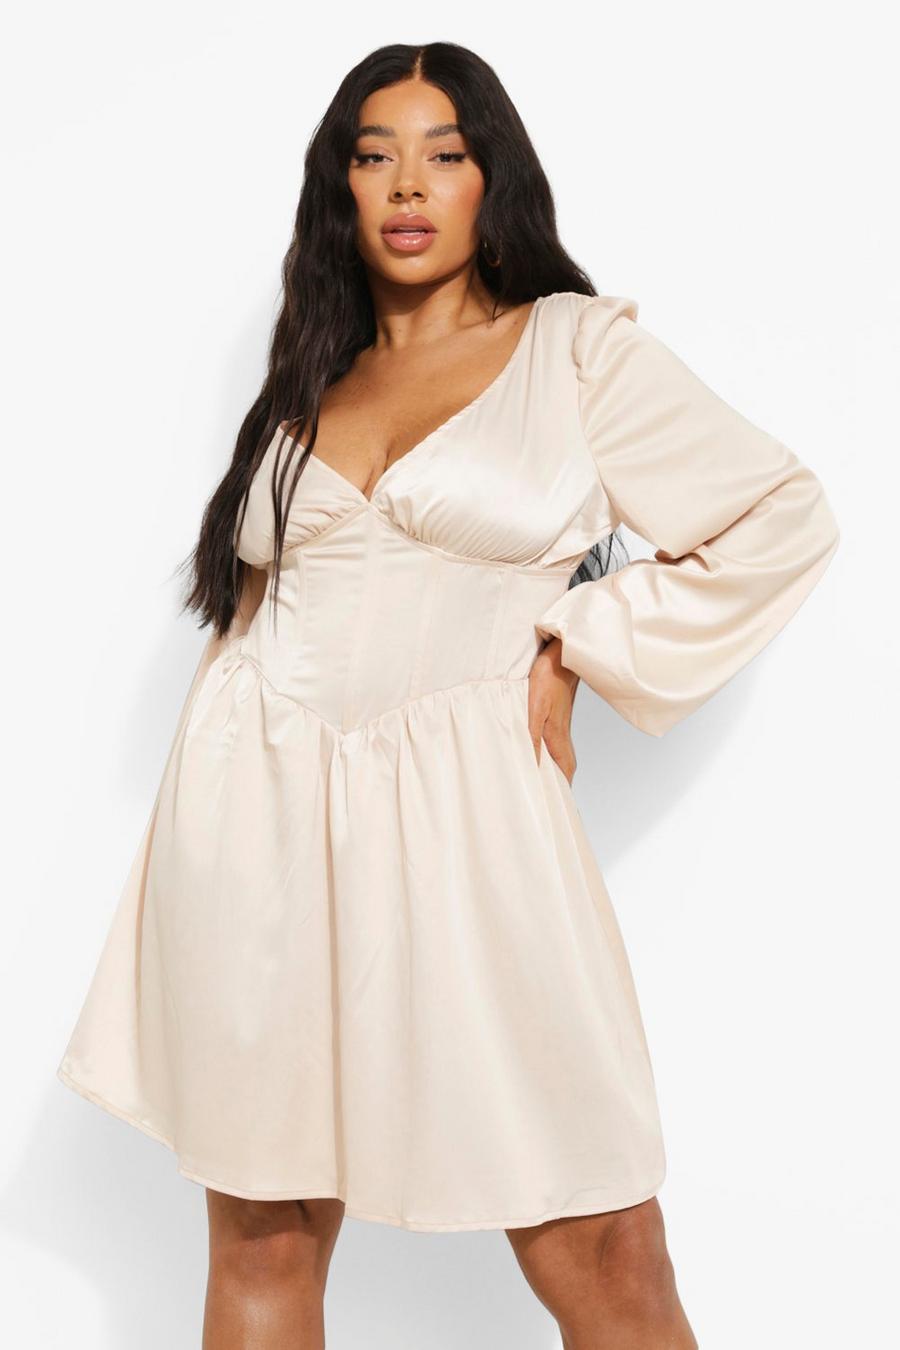 Grande taille - Robe patineuse satinée style corsage, Cream image number 1